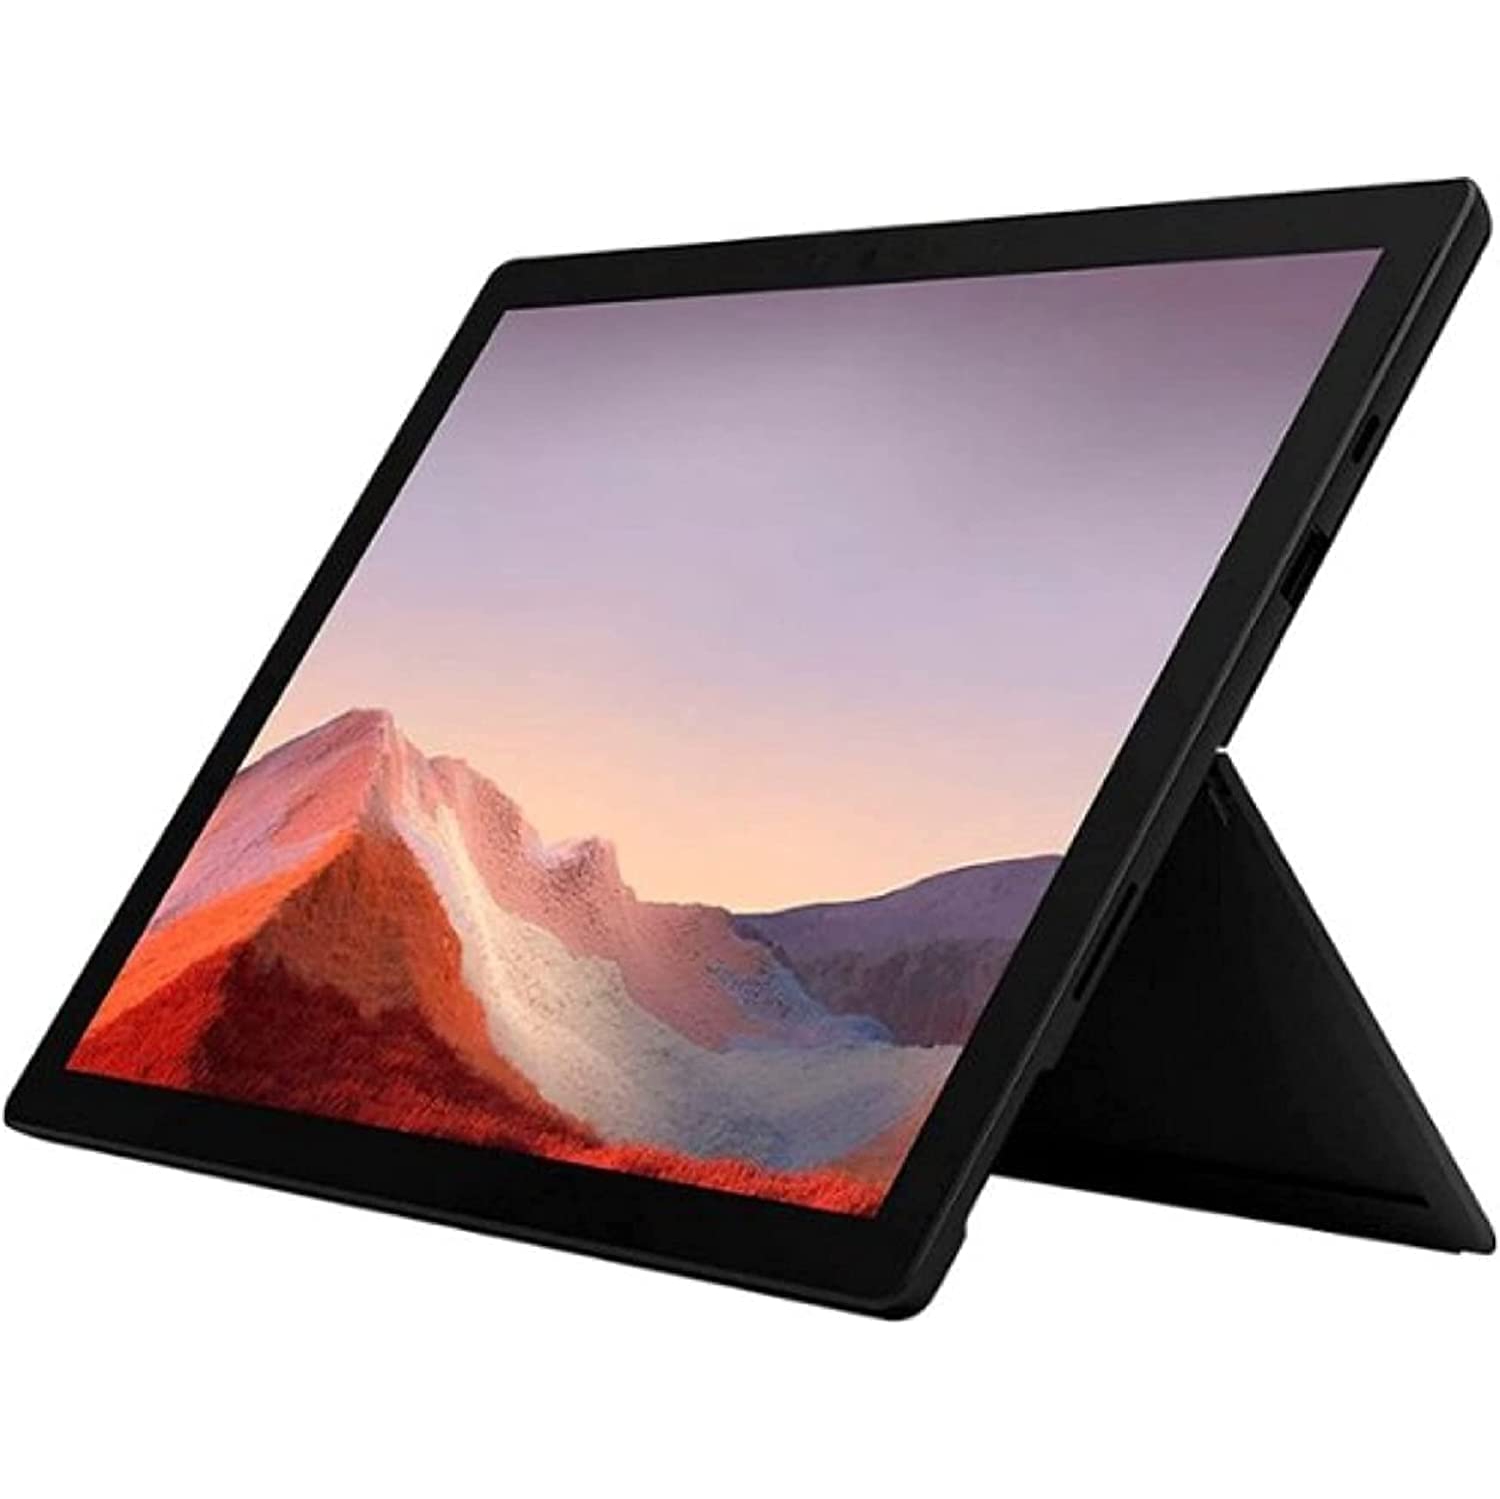 Refurbished (excellent) Microsoft Surface Pro 7+ 12.3" 256GB Windows 10 Tablet With Intel Core i7-1165G7 Quad-Core Processor - Black - (1NC-00016) W/ Free Keyboard